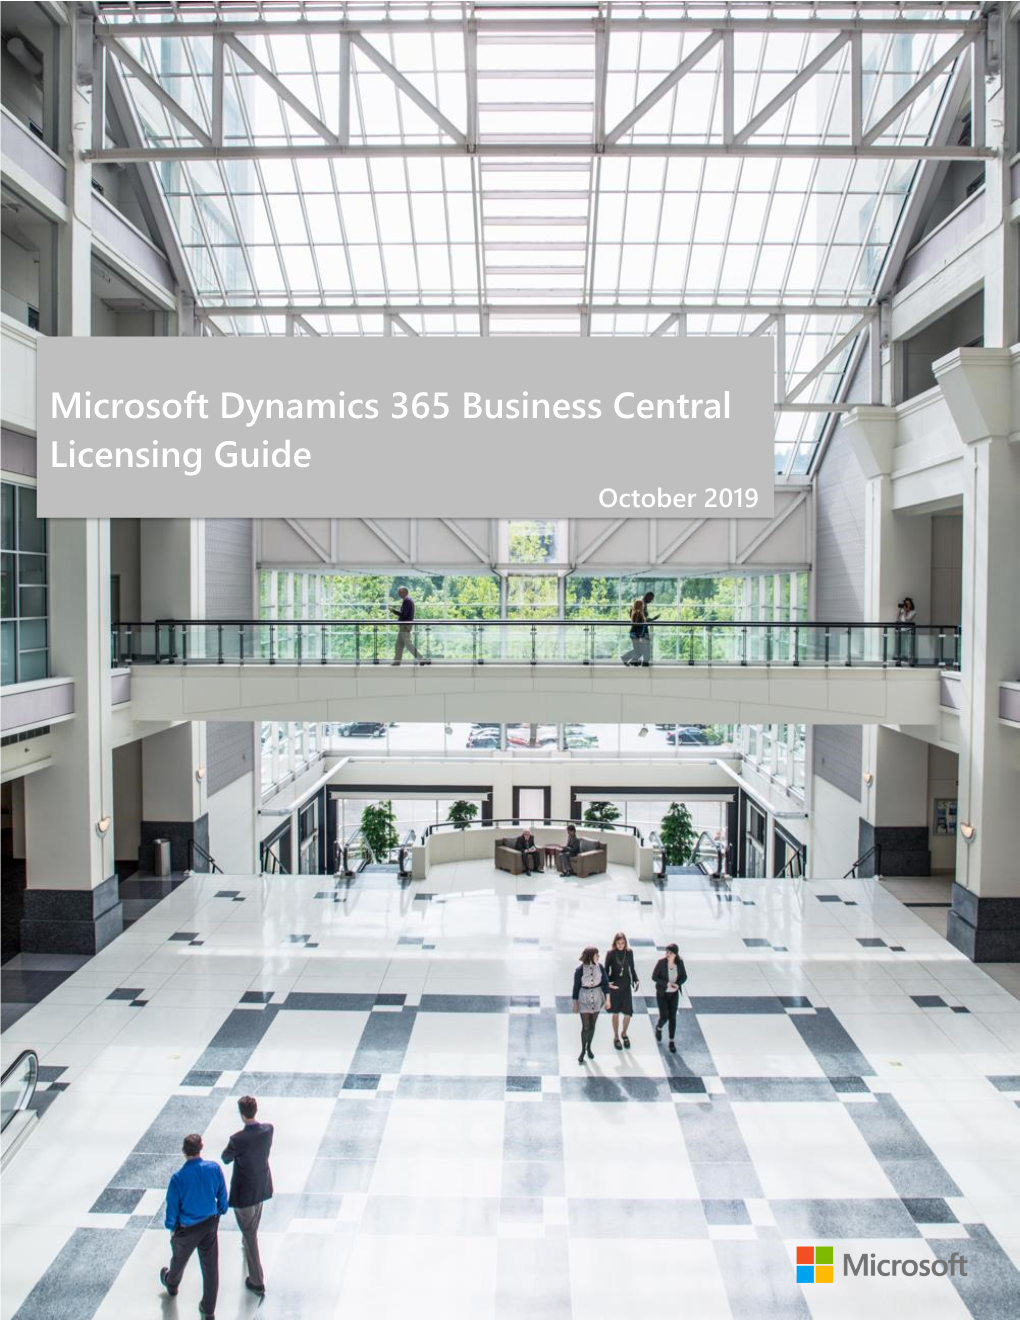 Microsoft Dynamics 365 Business Central Licensing Guide October 2019